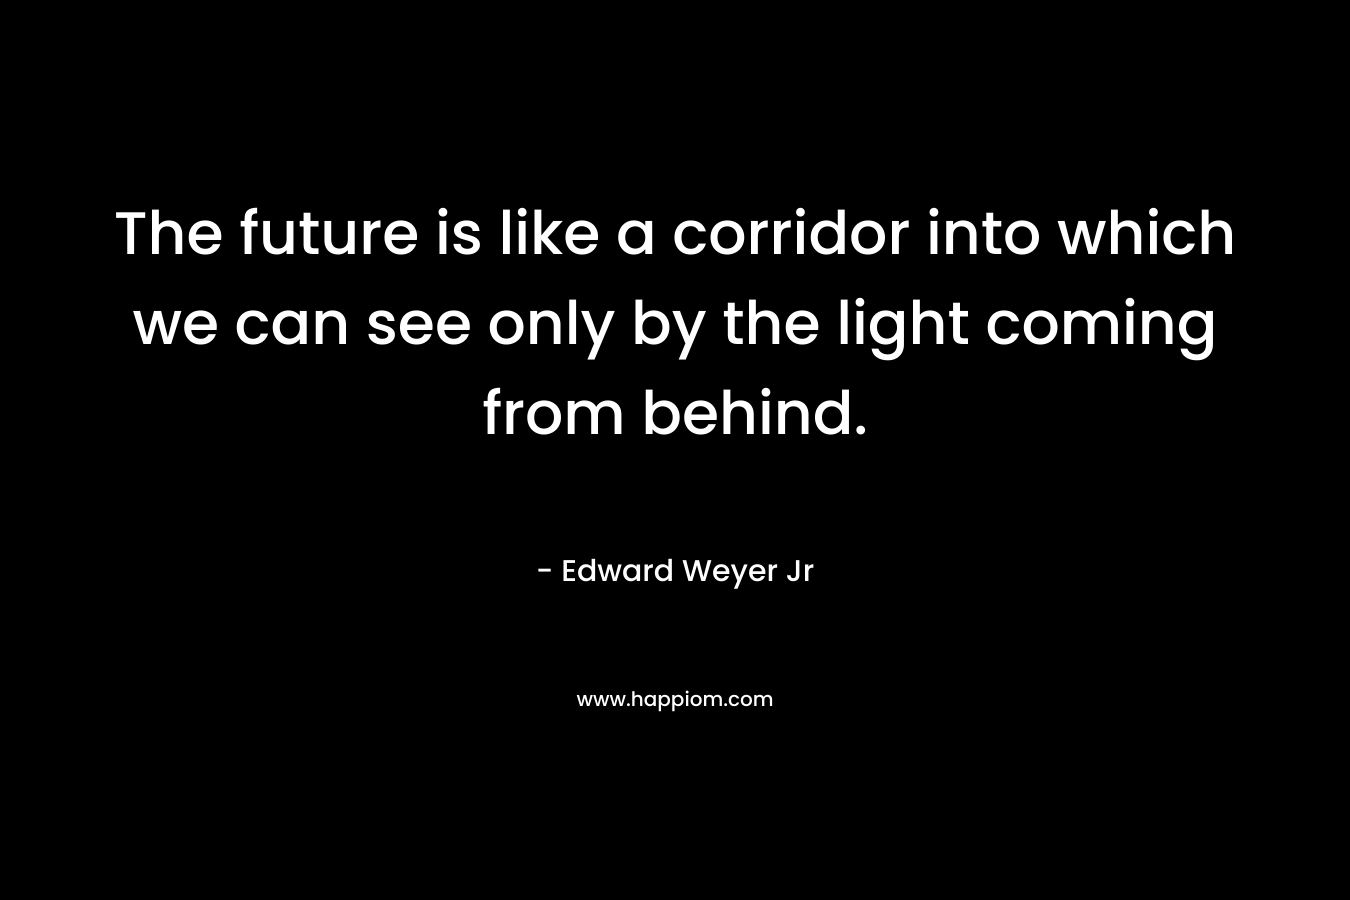 The future is like a corridor into which we can see only by the light coming from behind.